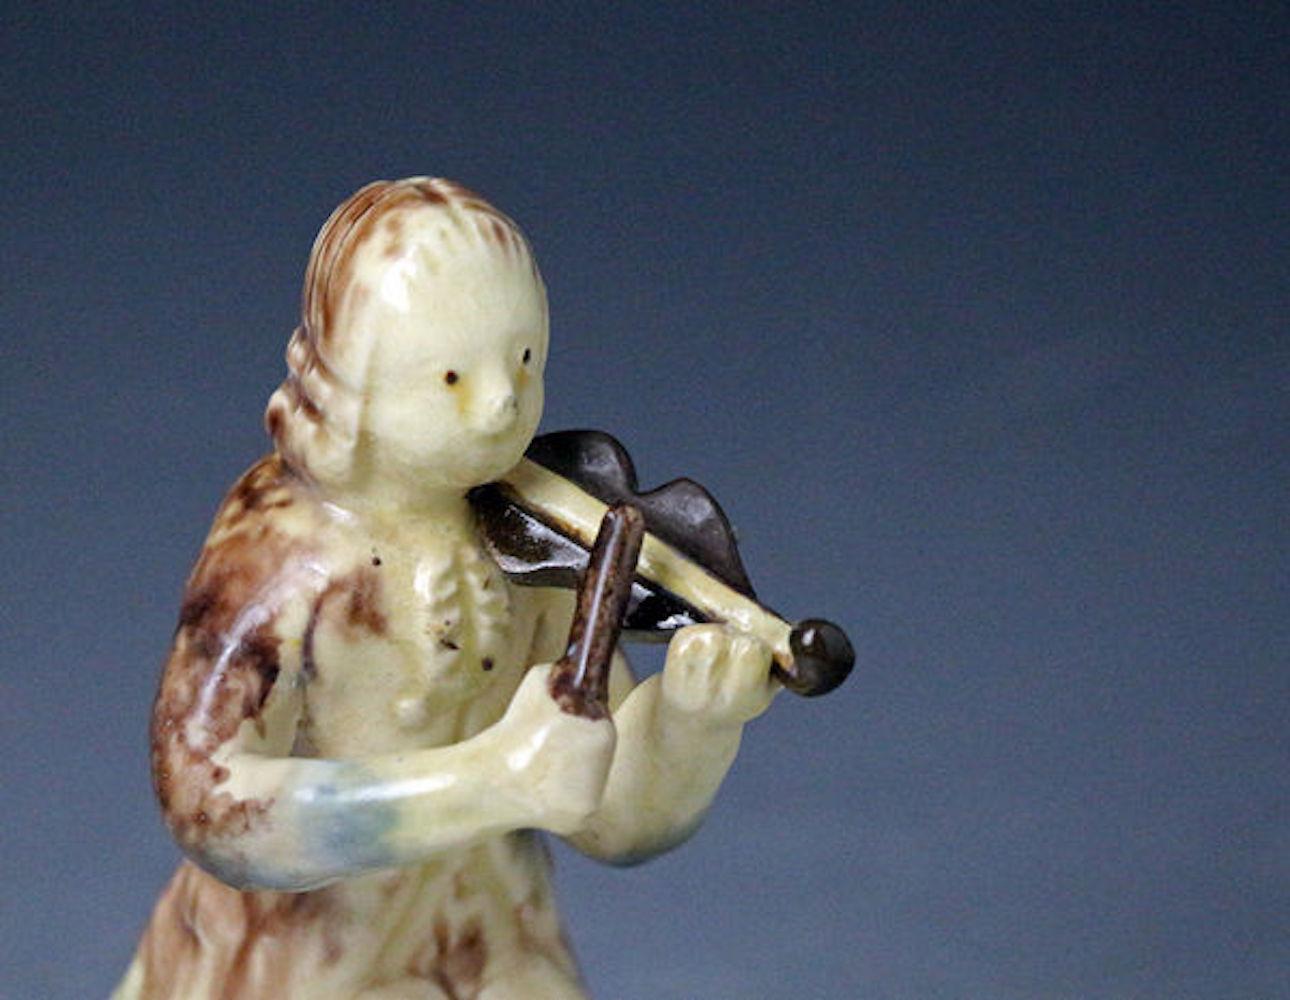 Early English pottery Staffordshire figure of a seated violinist. The figure is made with two colored clays in the Astbury- Whieldon style. A rare and charming piece from the early days of the Potteries.

Dimensions: 2.00 inch wide 5.00 inch high